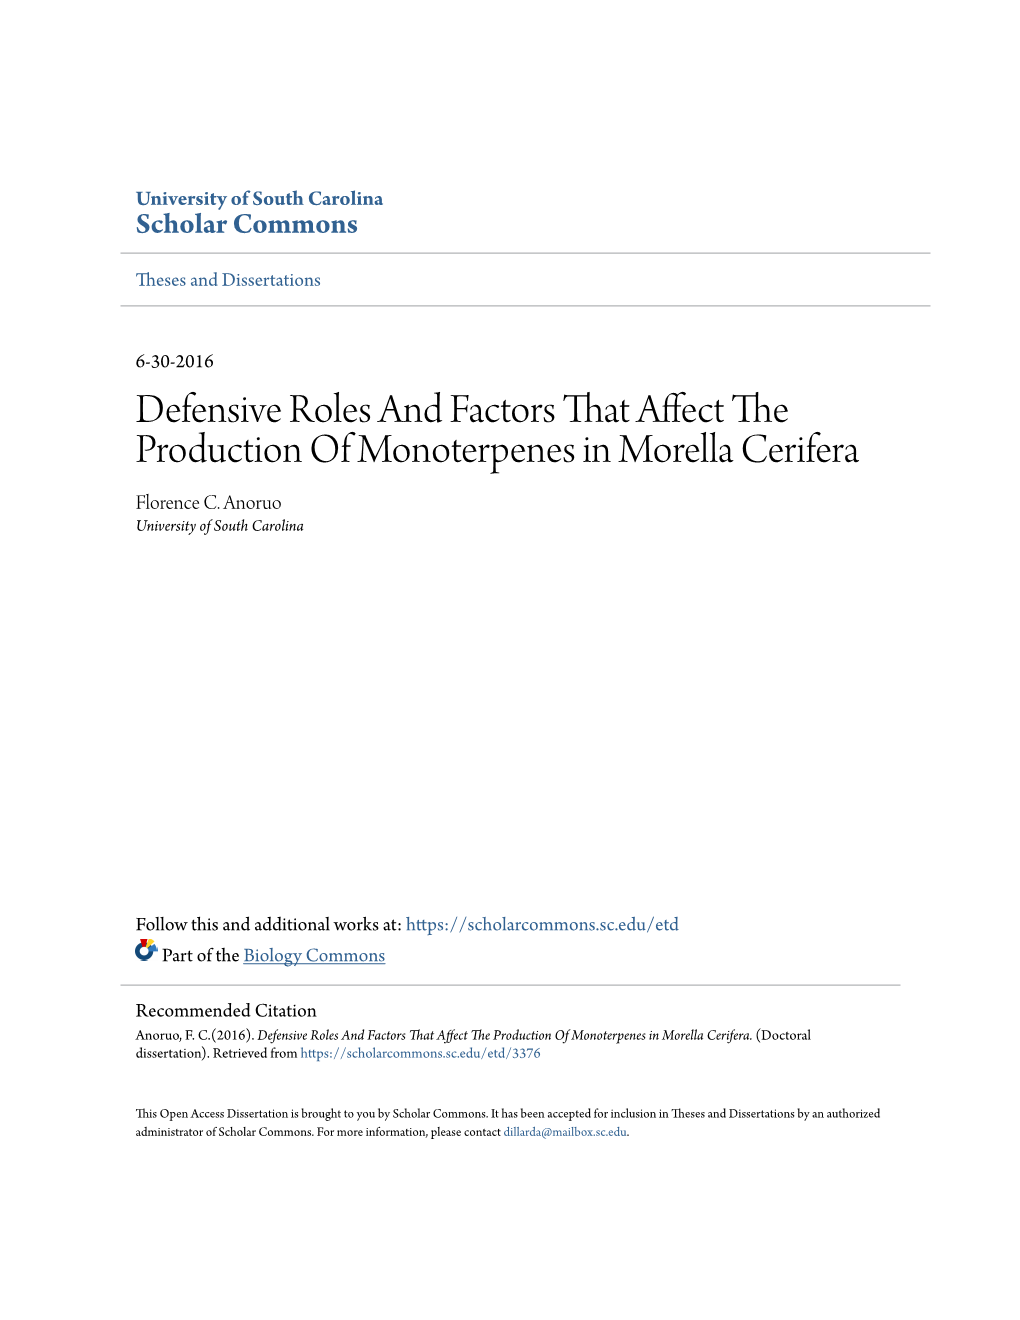 Defensive Roles and Factors That Affect the Production of Monoterpenes in Morella Cerifera Florence C